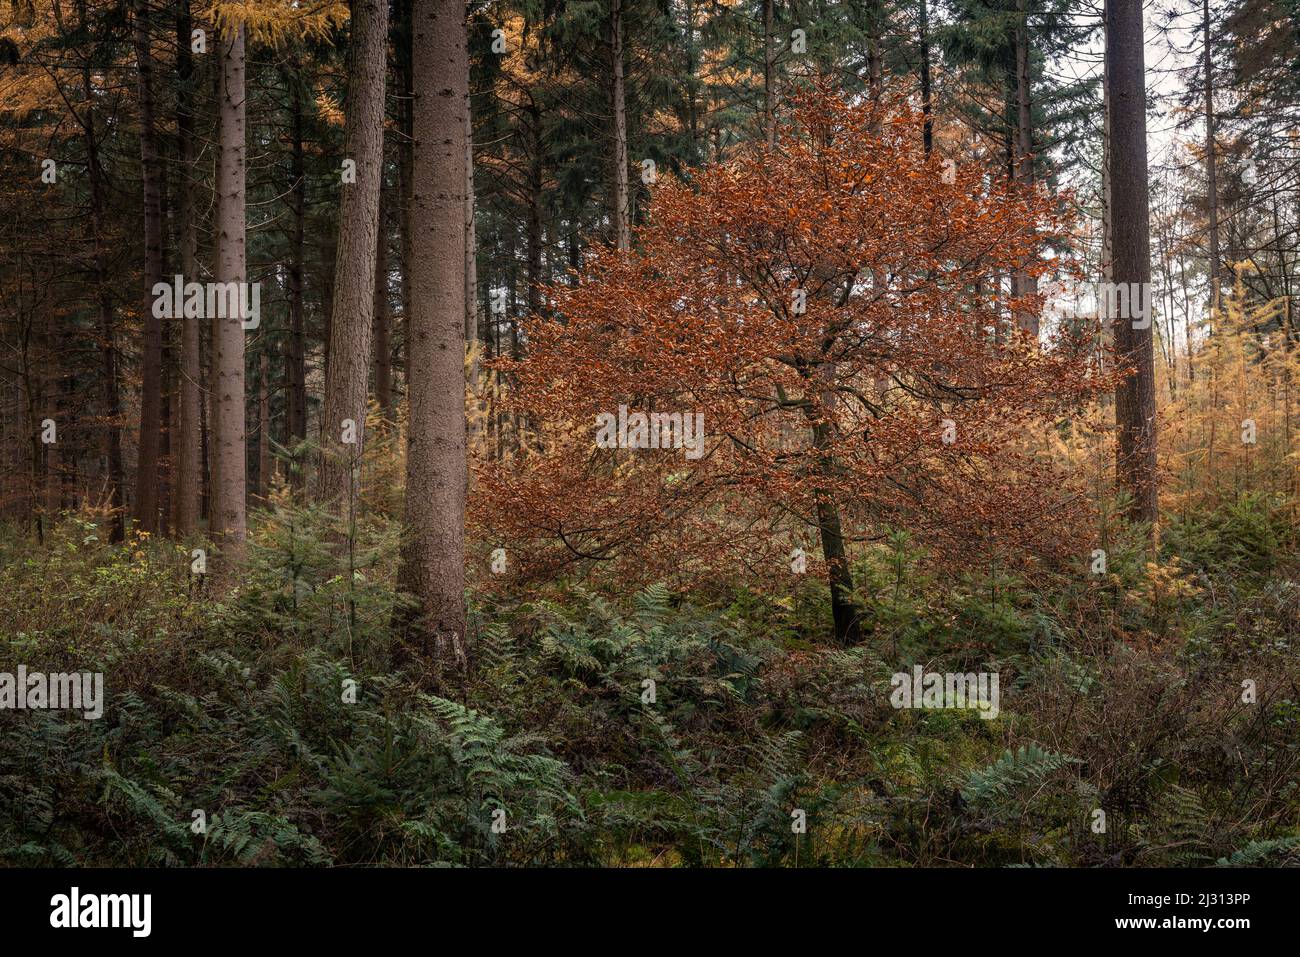 Beech between conifers in the primeval forest Baumweg, Ahlhorn, Lower Saxony, Germany, Europe Stock Photo